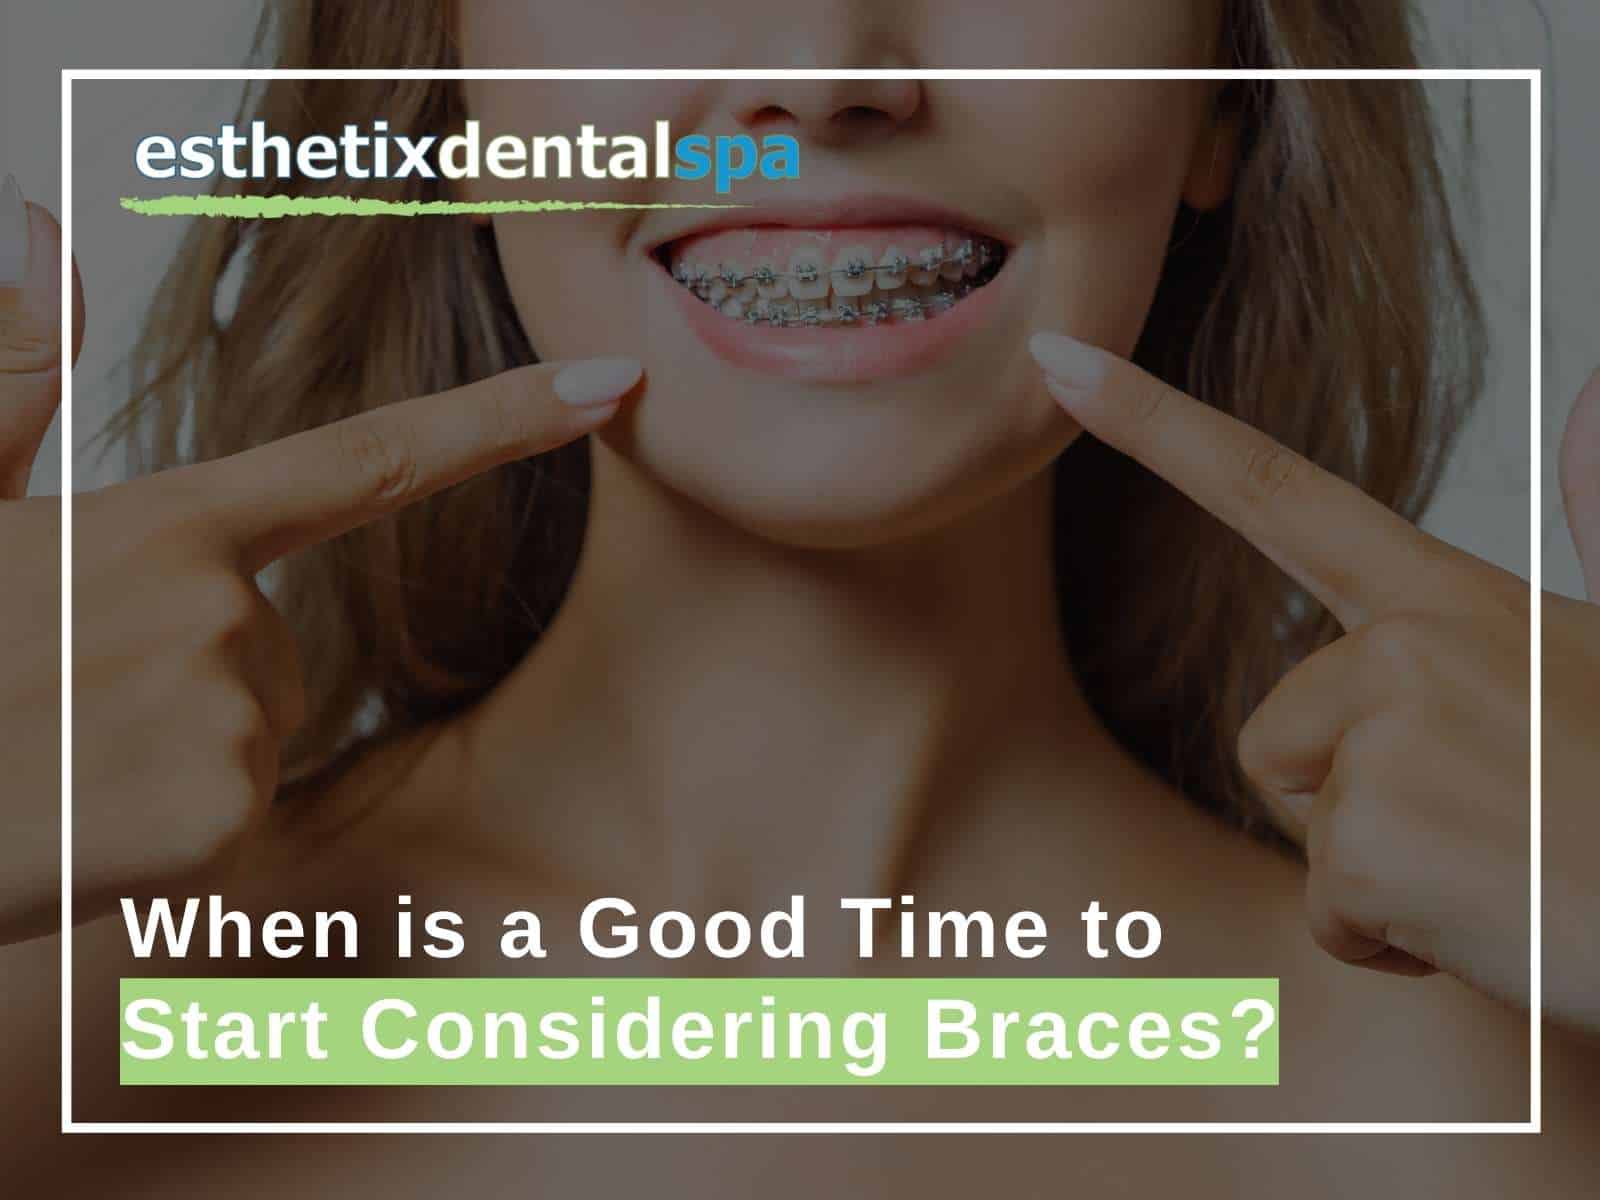 When is a Good Time to Start Considering Braces